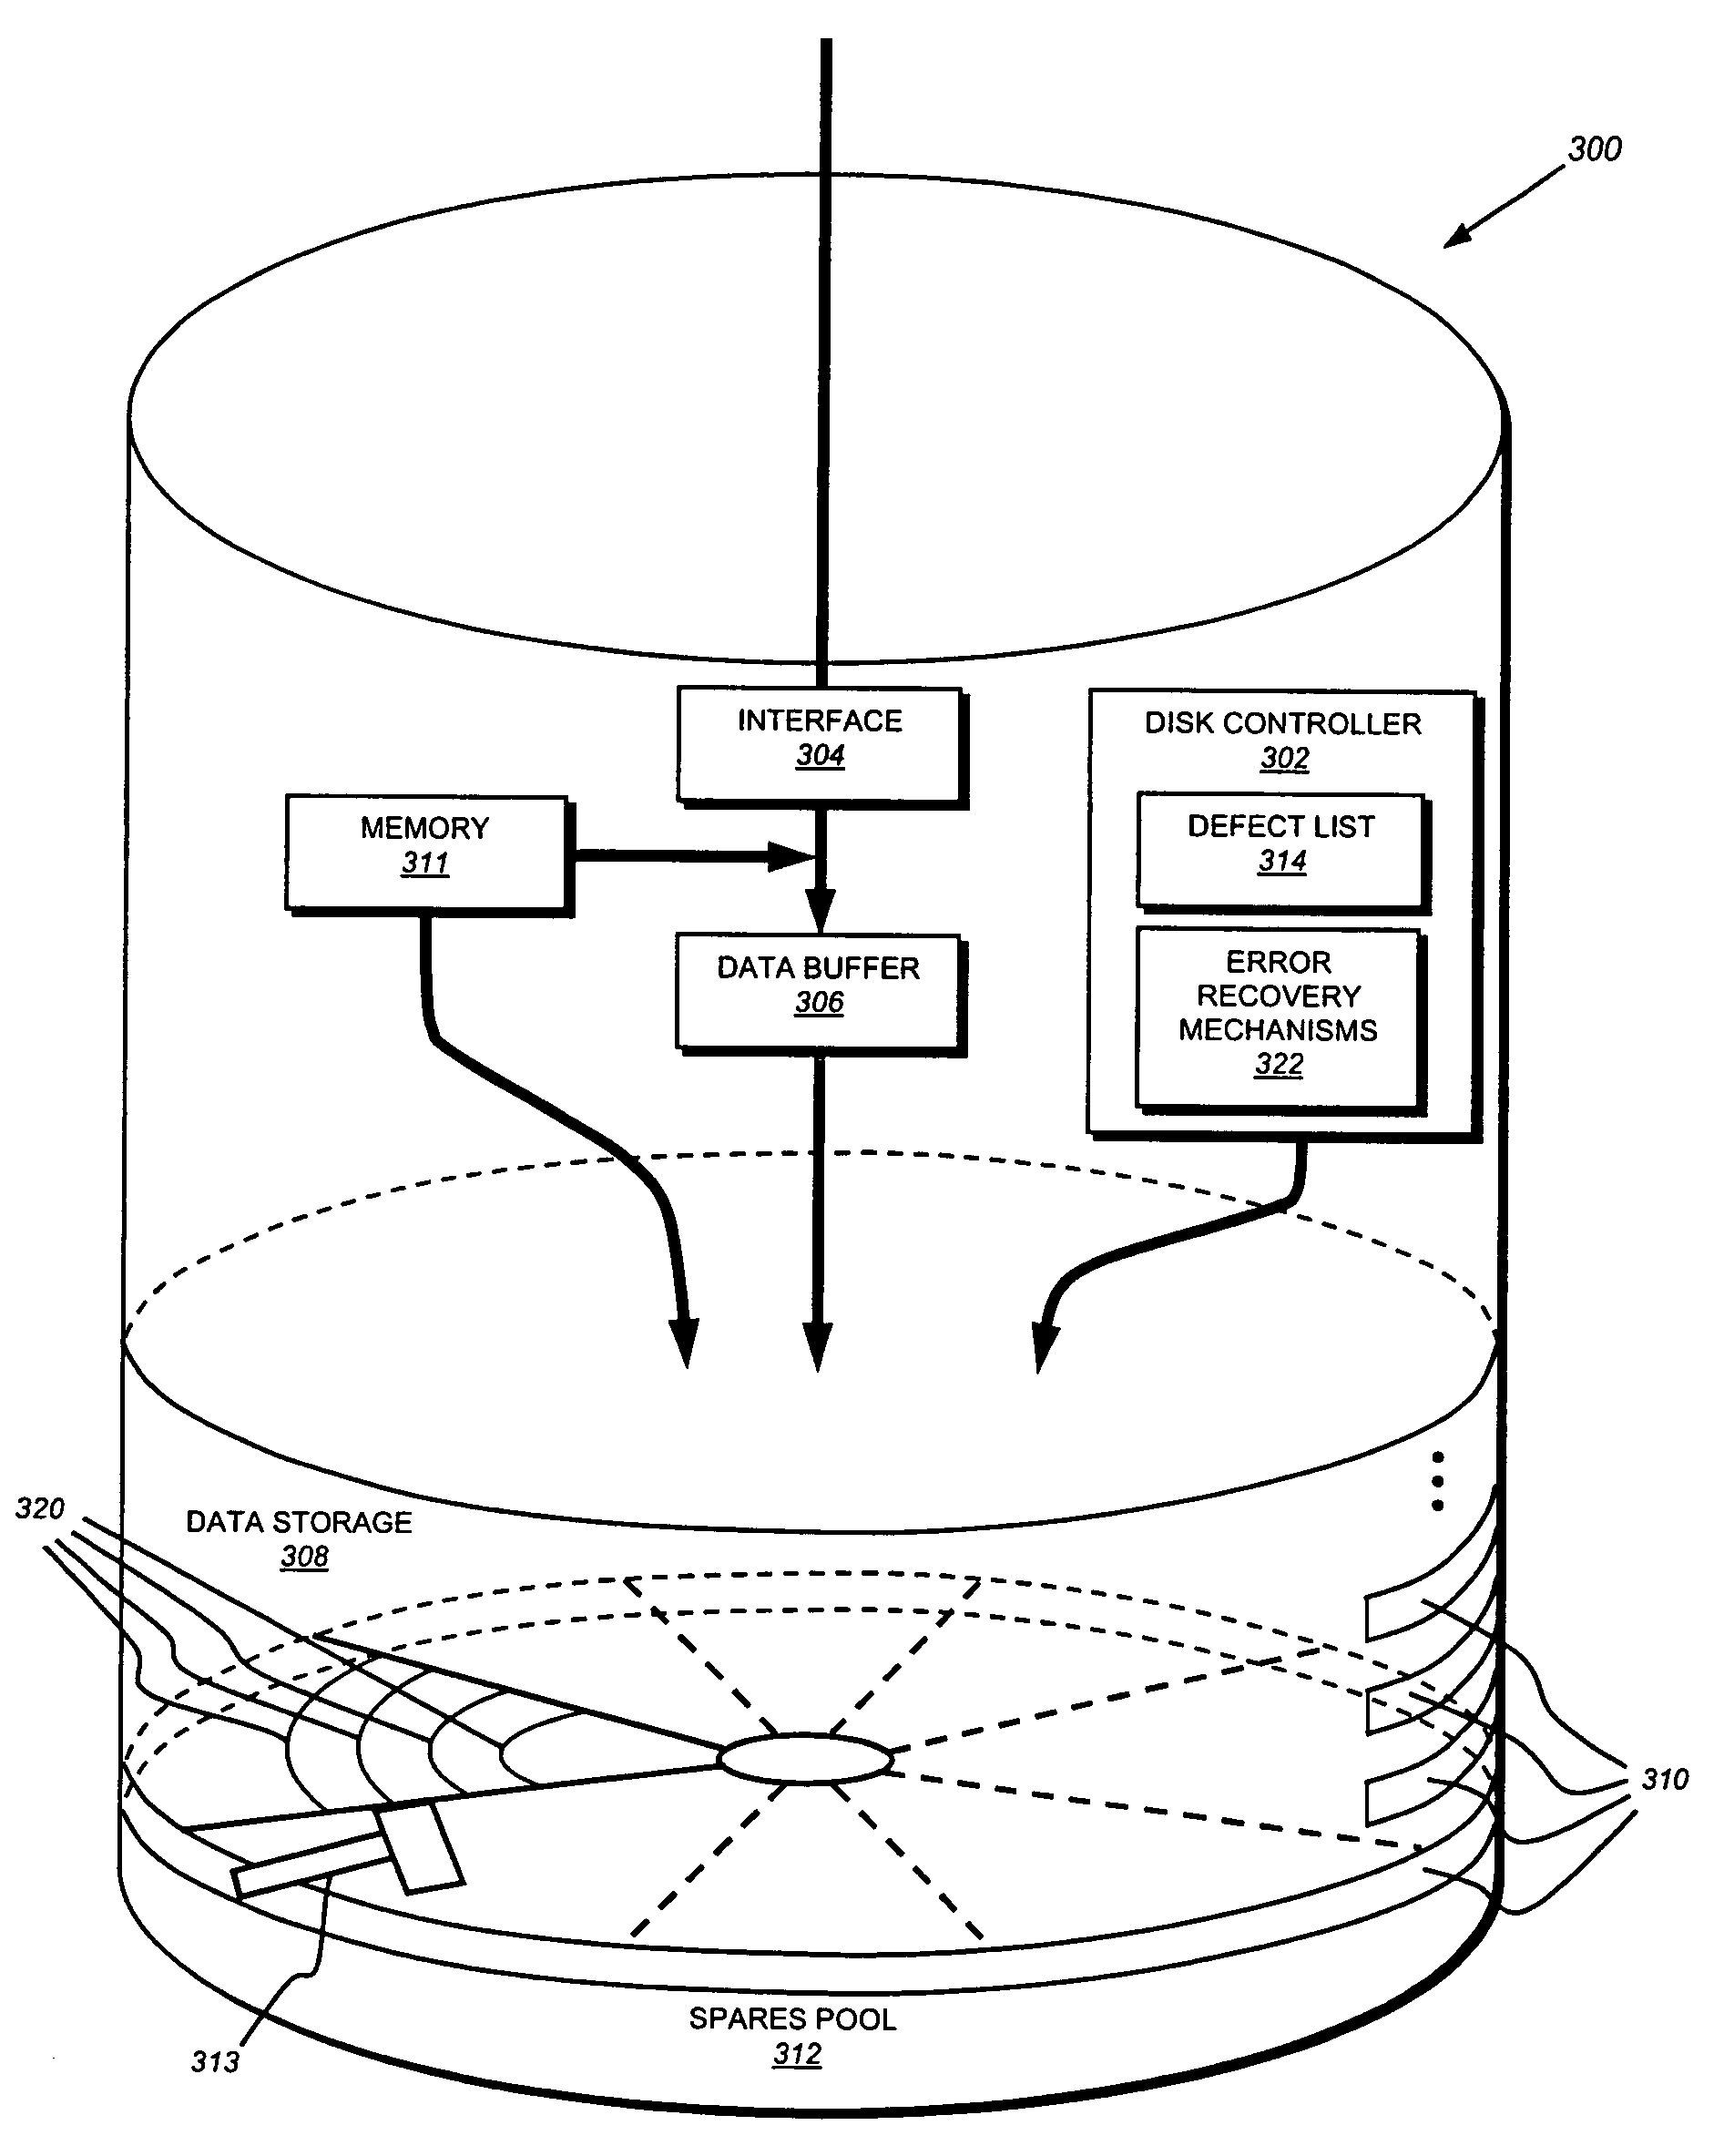 System and method for reducing unrecoverable media errors in a disk subsystem